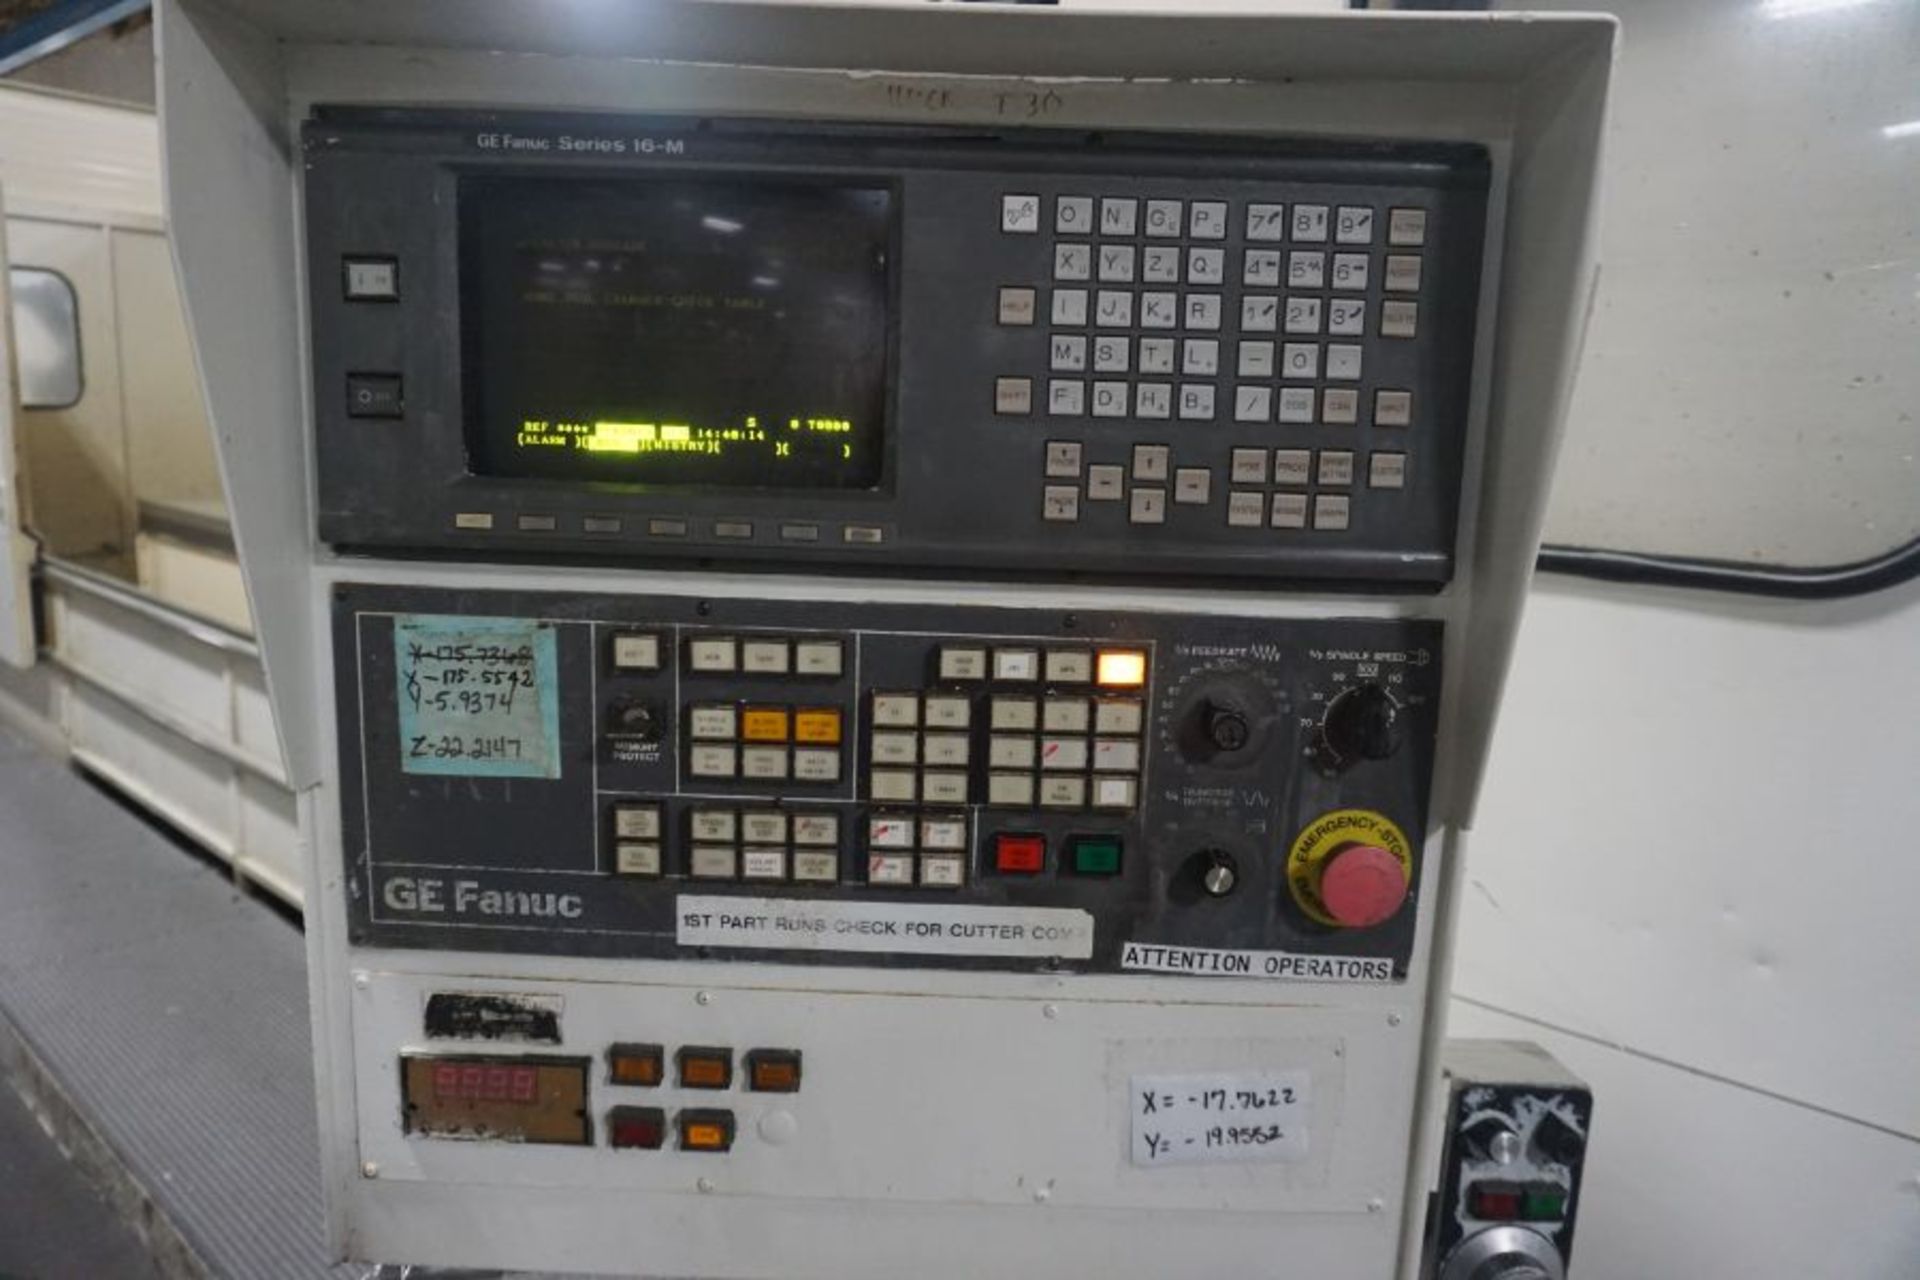 Komo VMC-180, Fanuc 16M, 180" x 24" x 22" travels, 10k RPM, CT40, 30 ATC, s/n 9996-03-01-97, New - Image 5 of 8